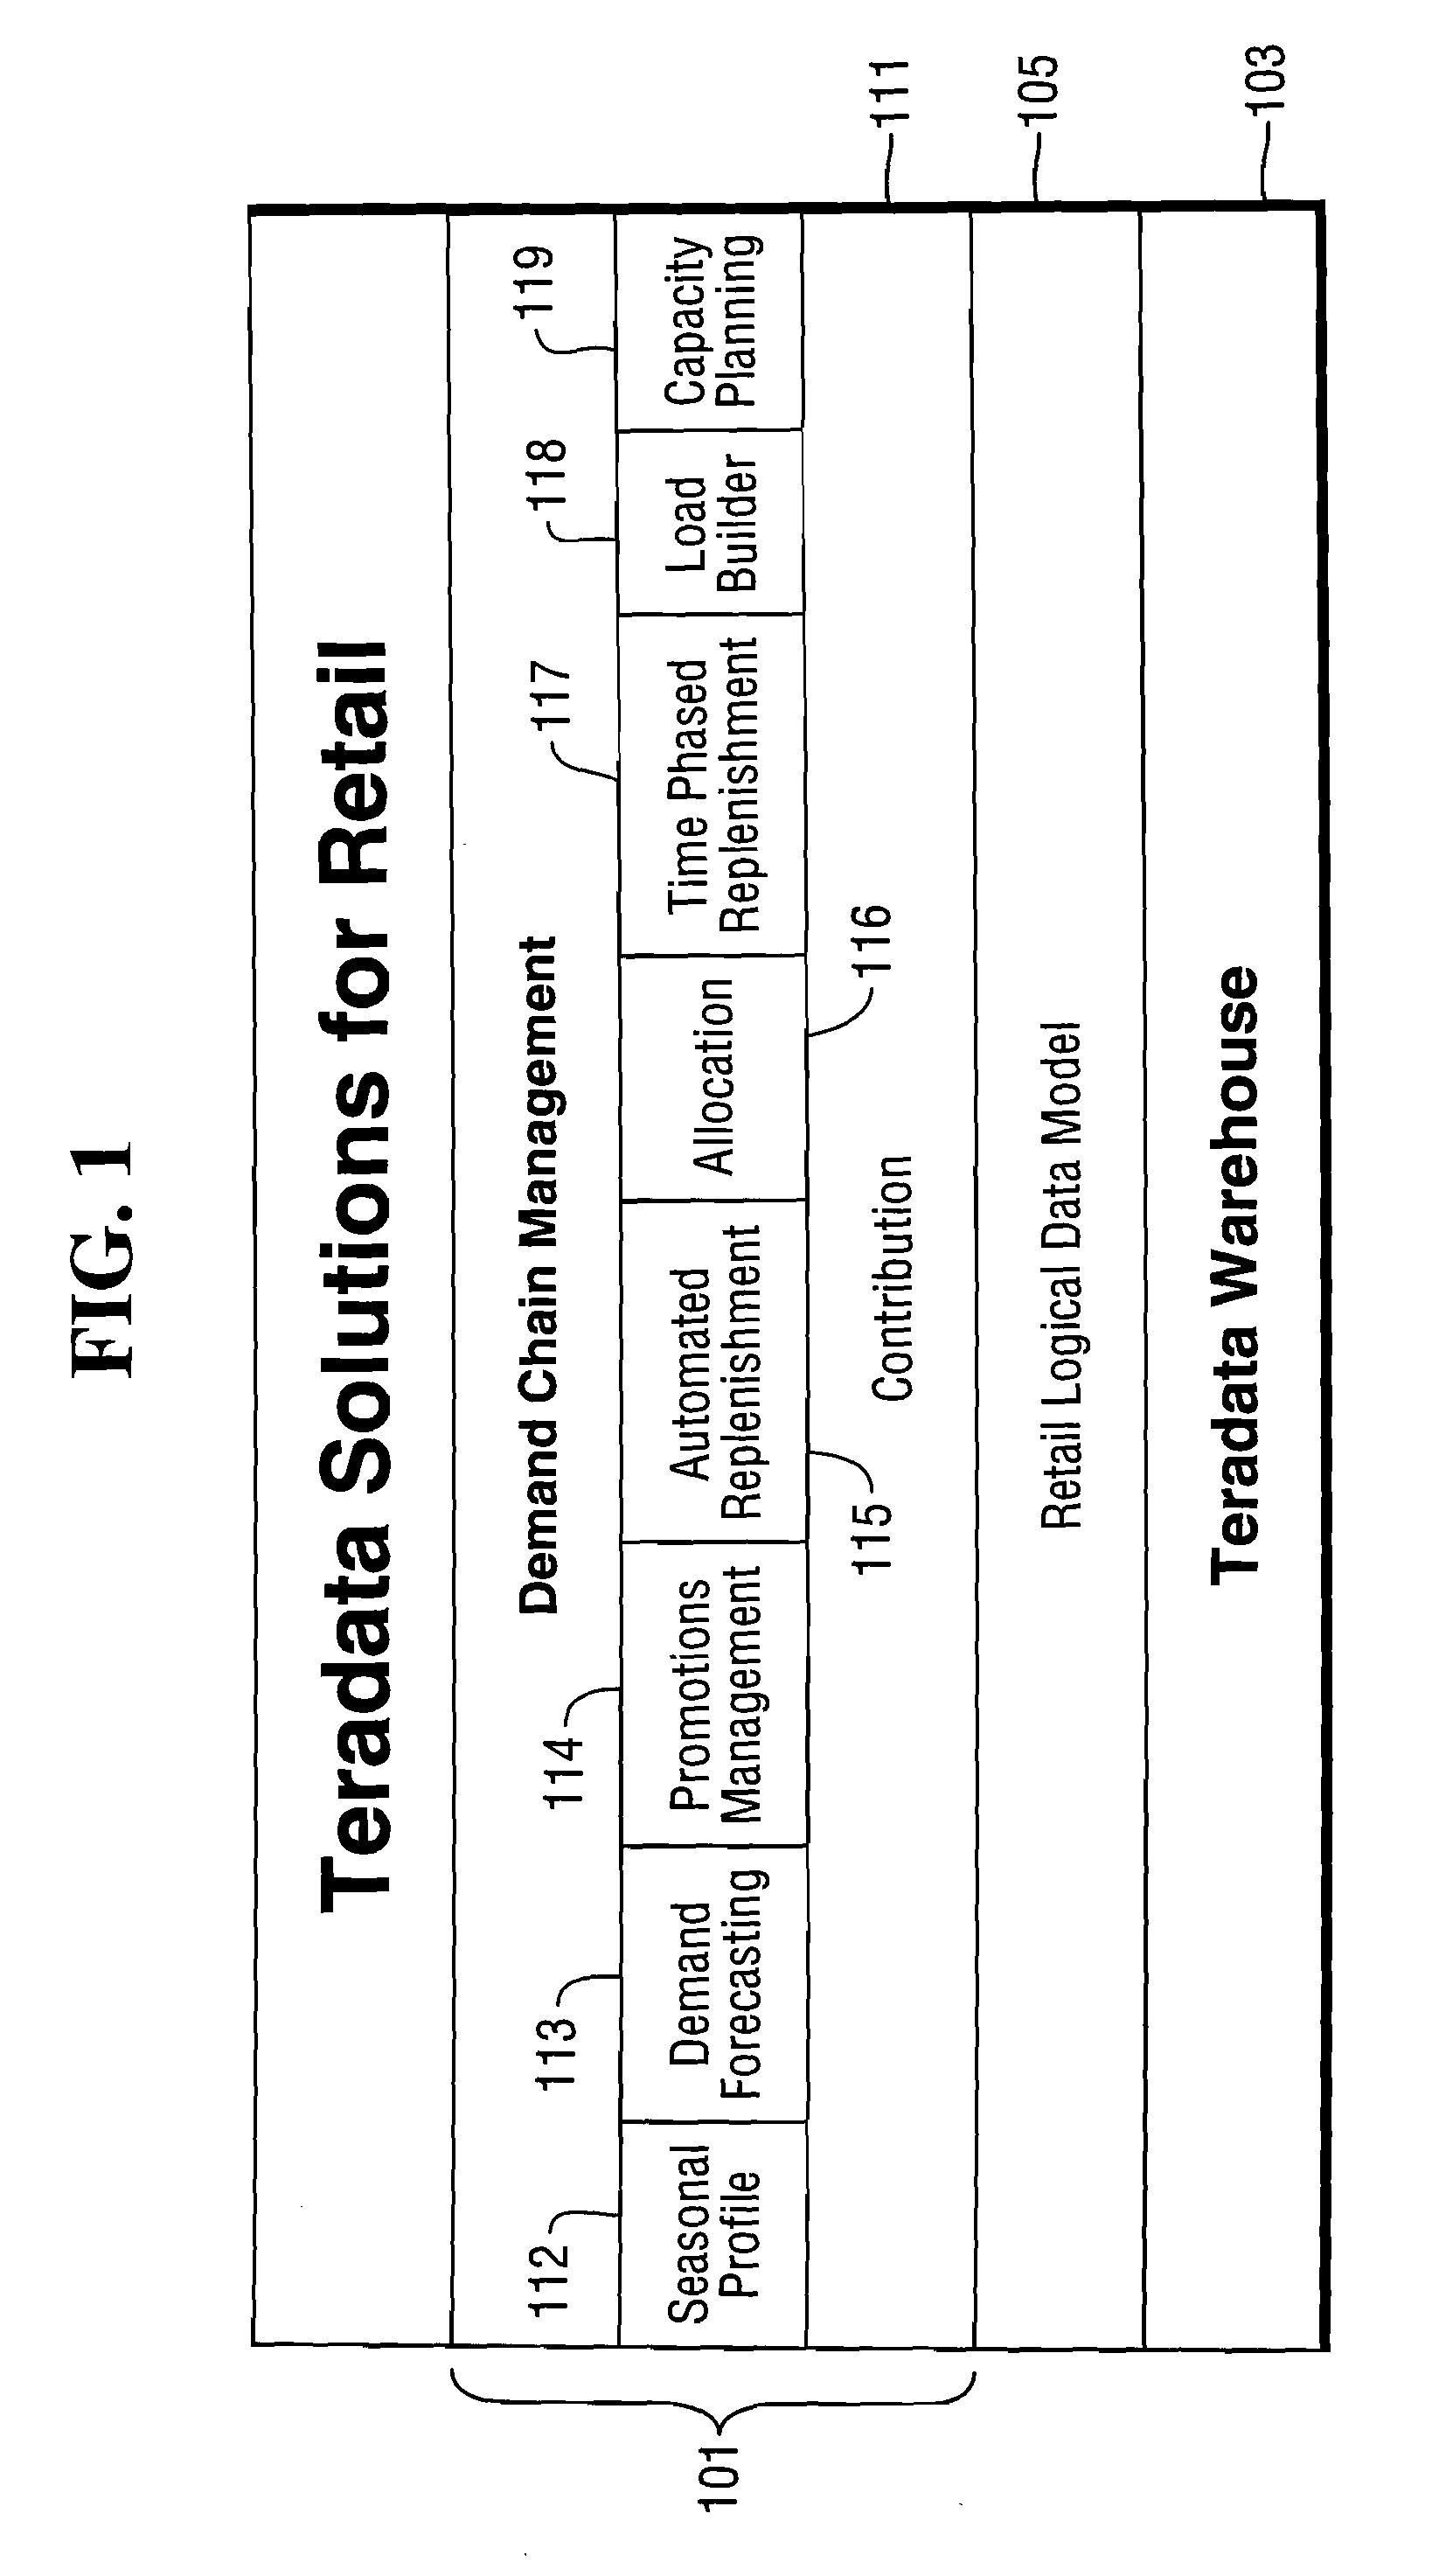 Methods and systems for forecasting product demand using a causal methodology